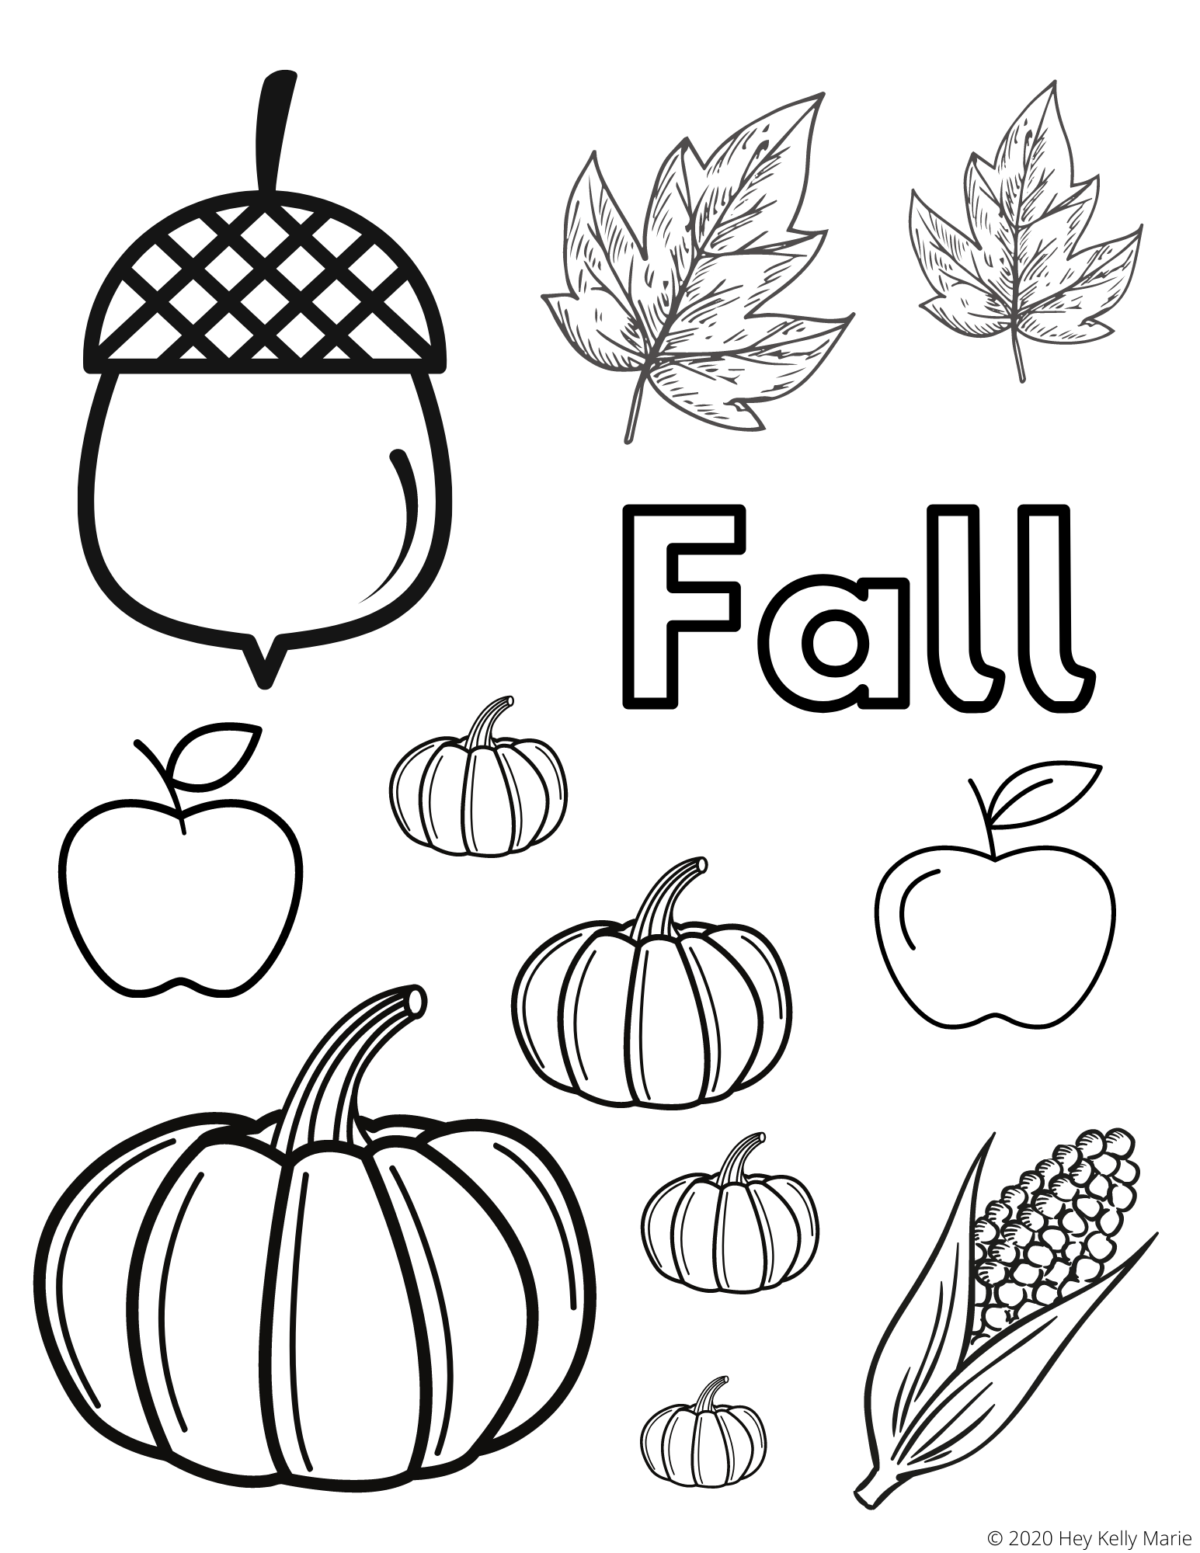 Fall Coloring Page with Free, Instant Access